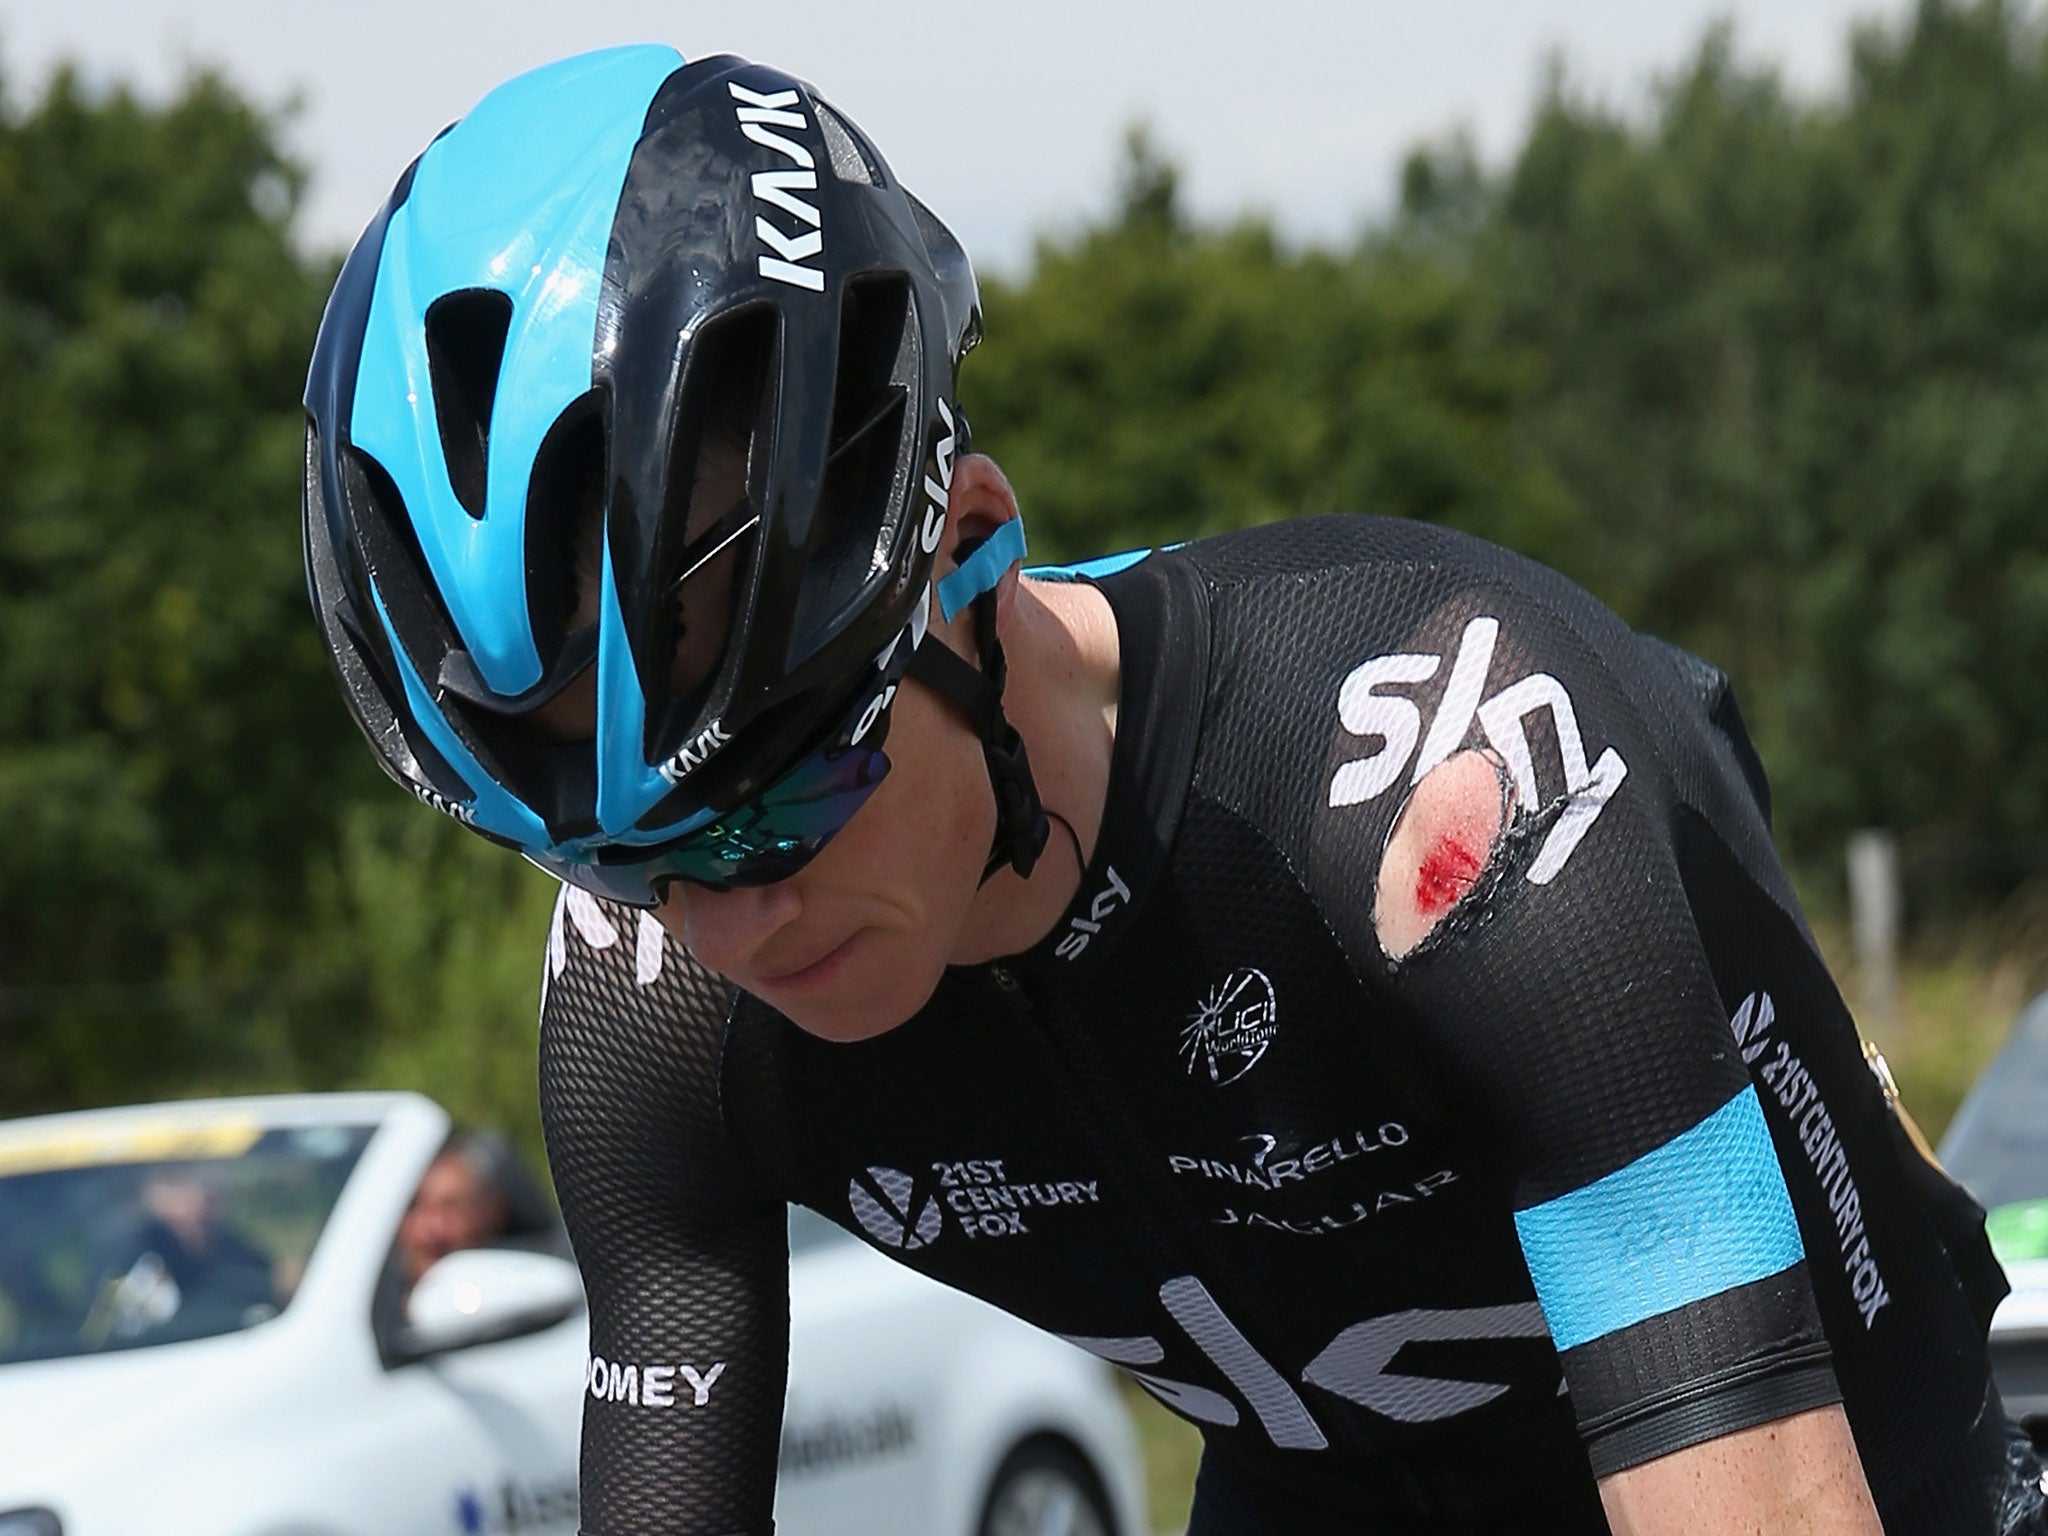 Chris Froome of Great Britain and Team Sky chases back to the peloton after being involved in a crash just after the start of stage four